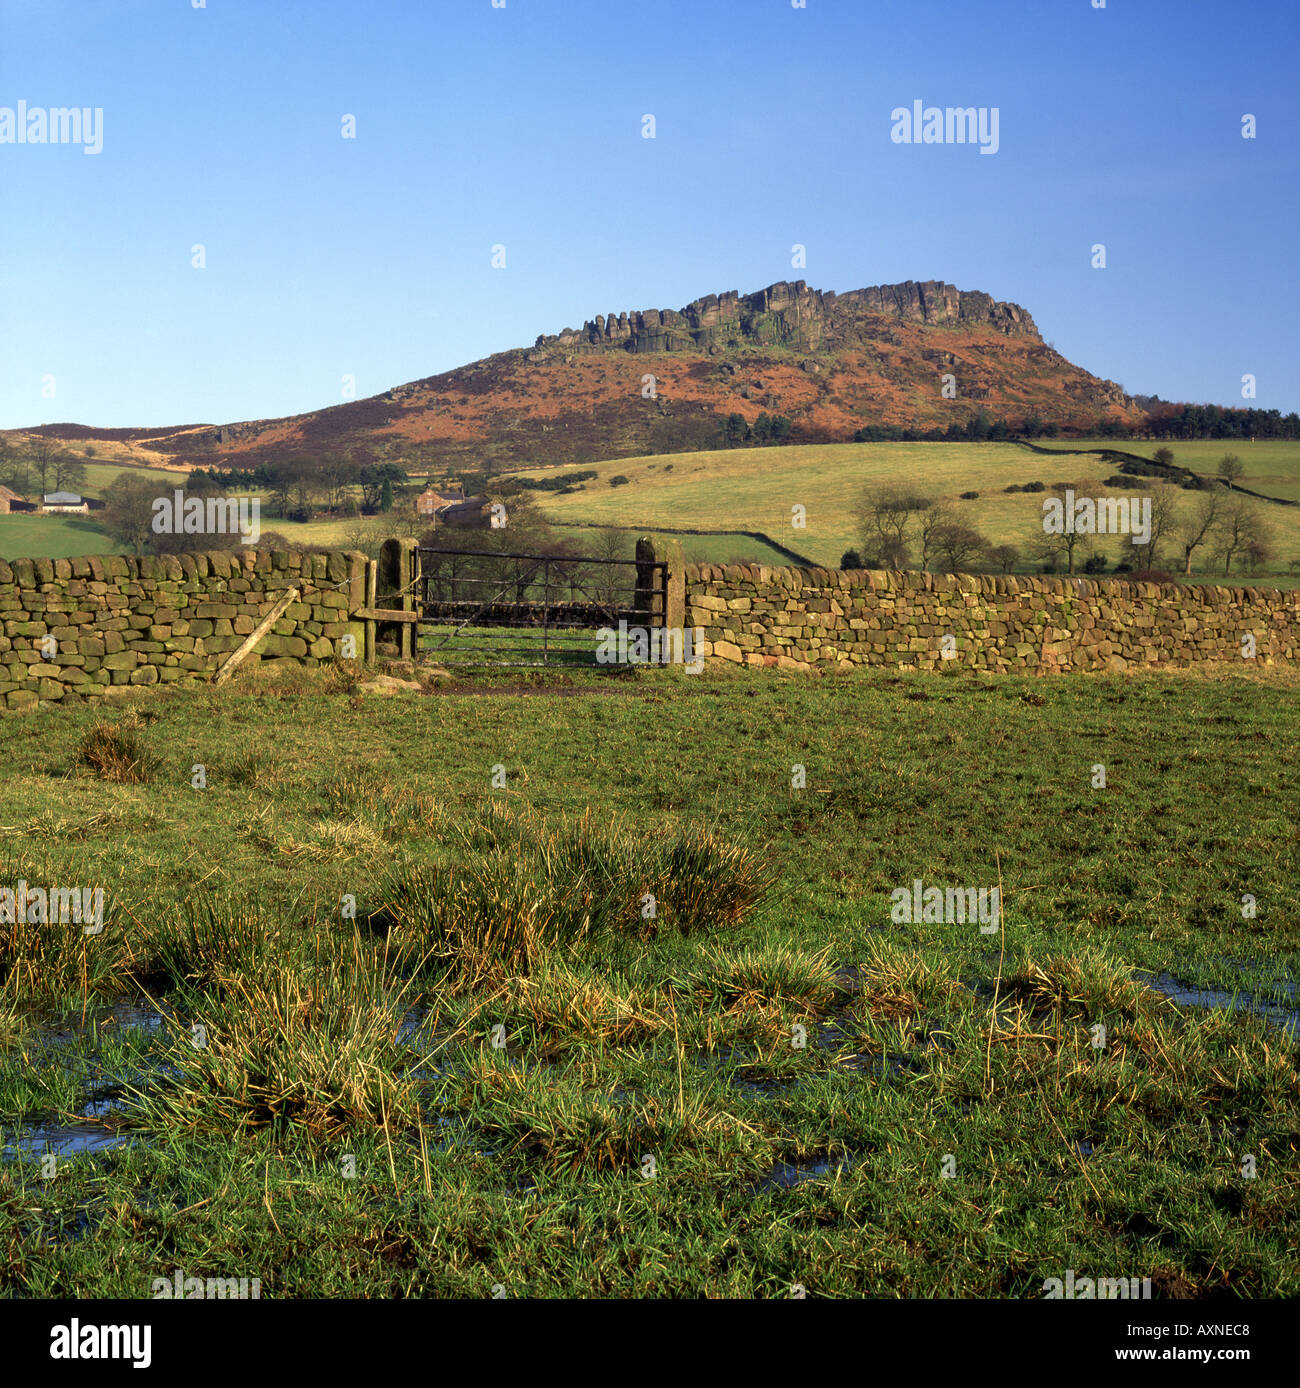 Il Roaches, Staffordshire Moorlands, Inghilterra Foto Stock